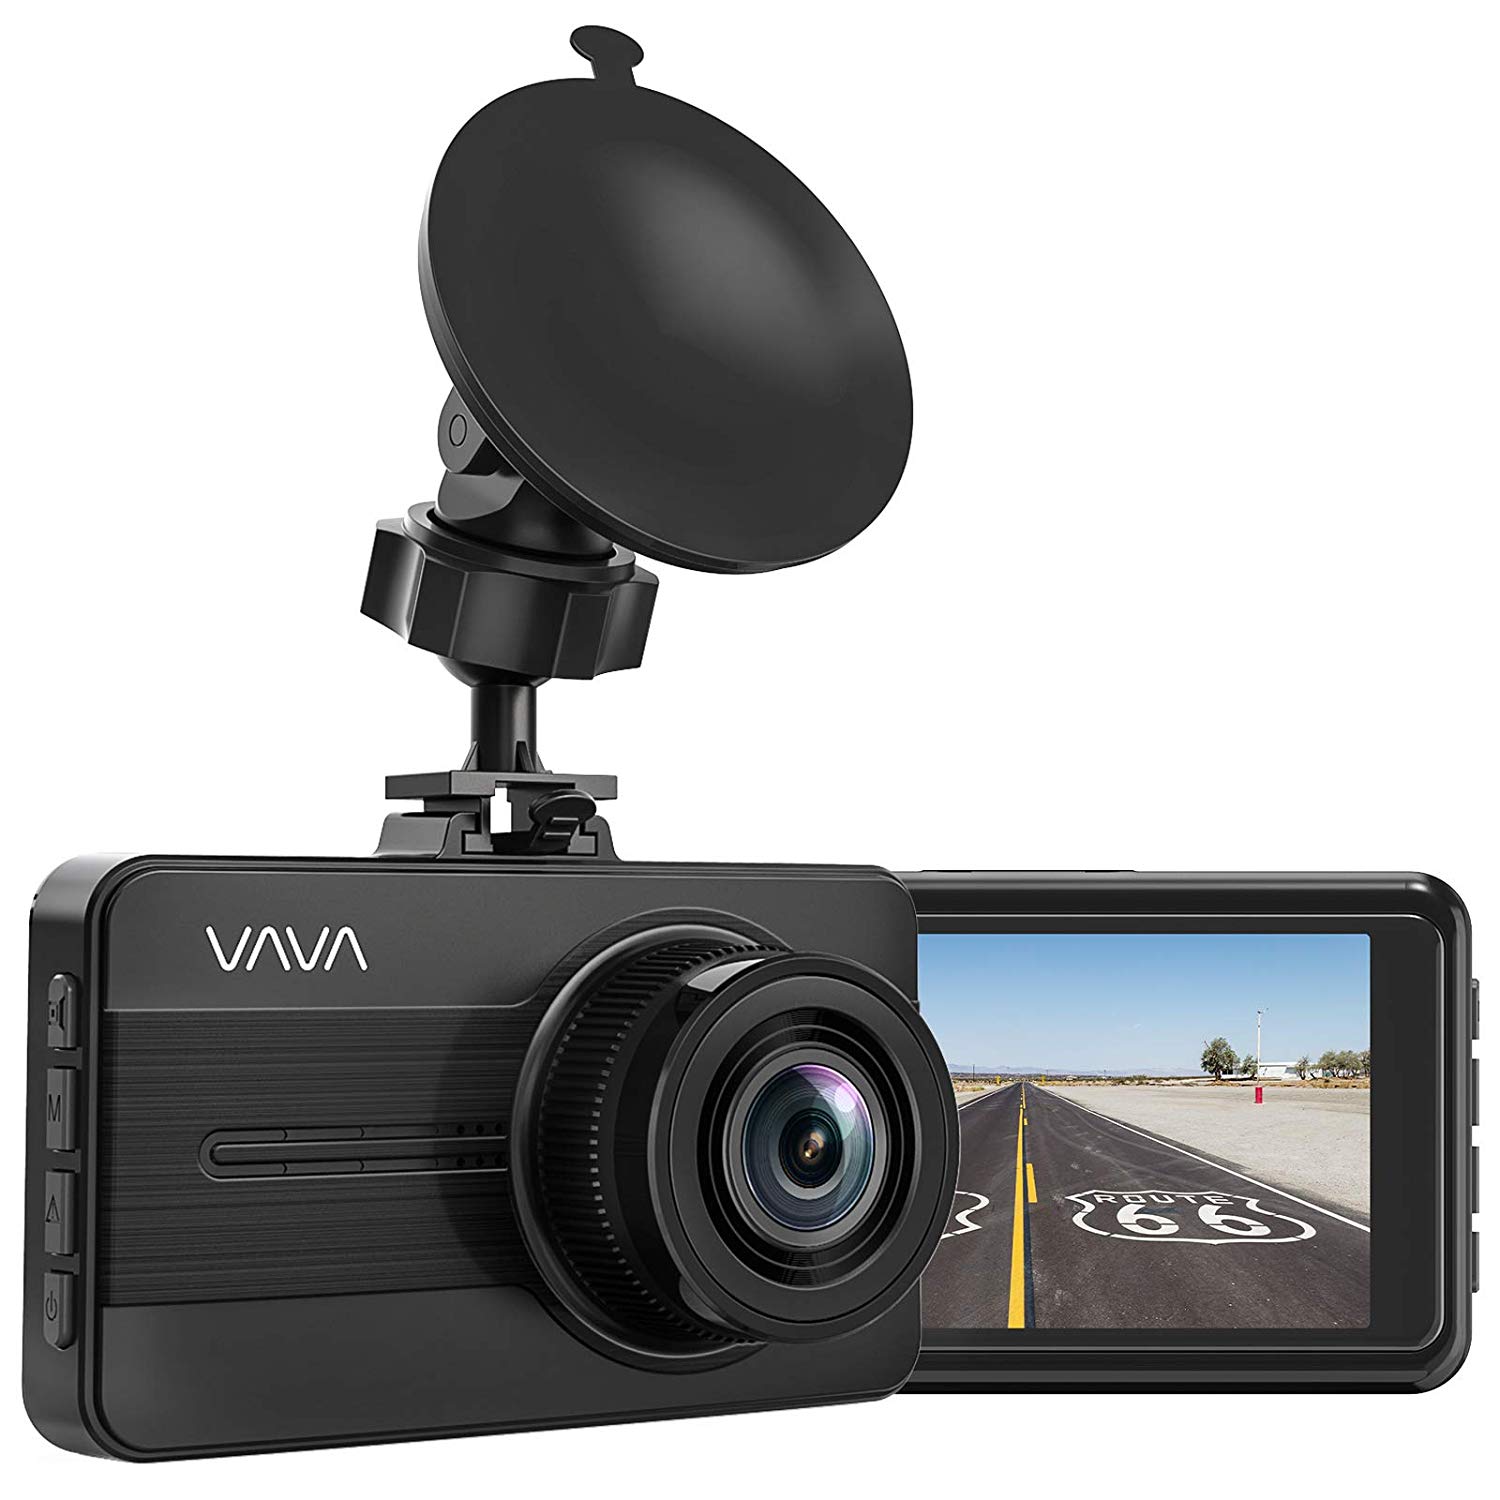 Today only: VAVA 1080P Full HD Car DVR dash cam for $35 - Clark Deals